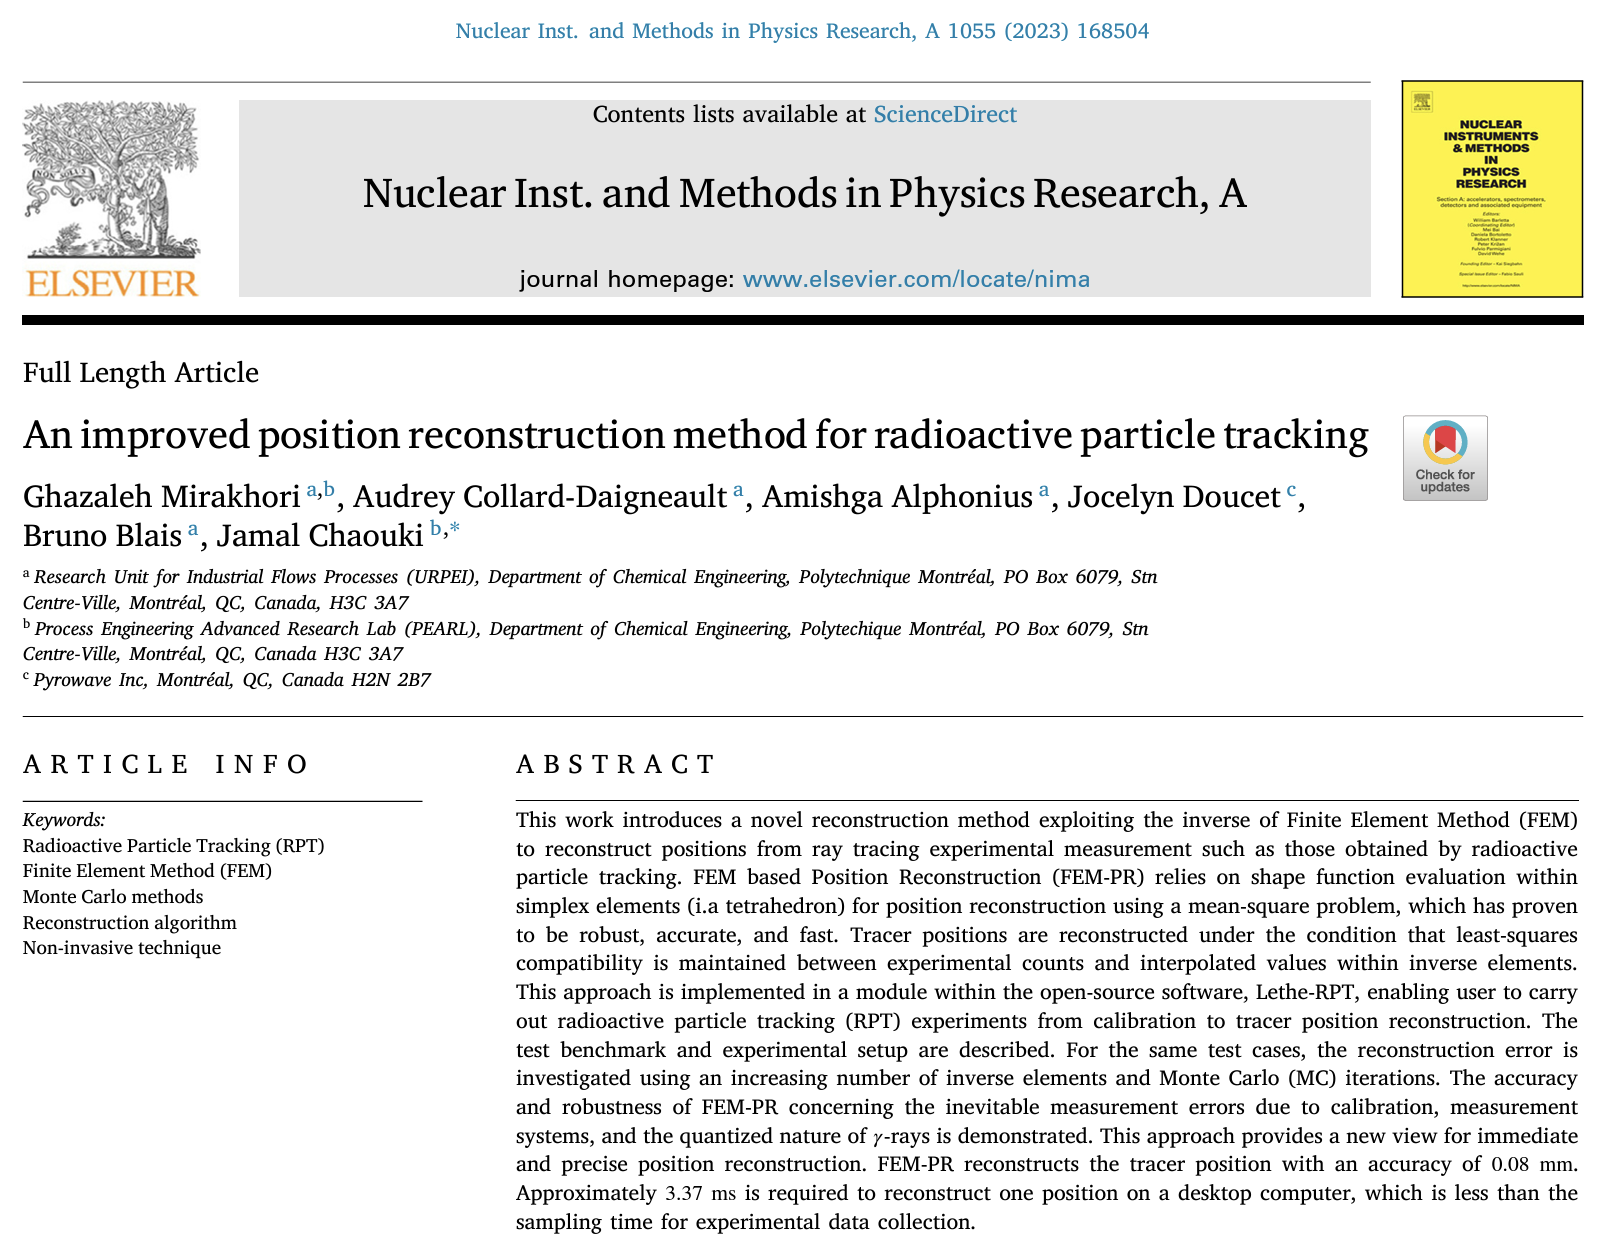 An improved position reconstruction method for radioactive particle tracking